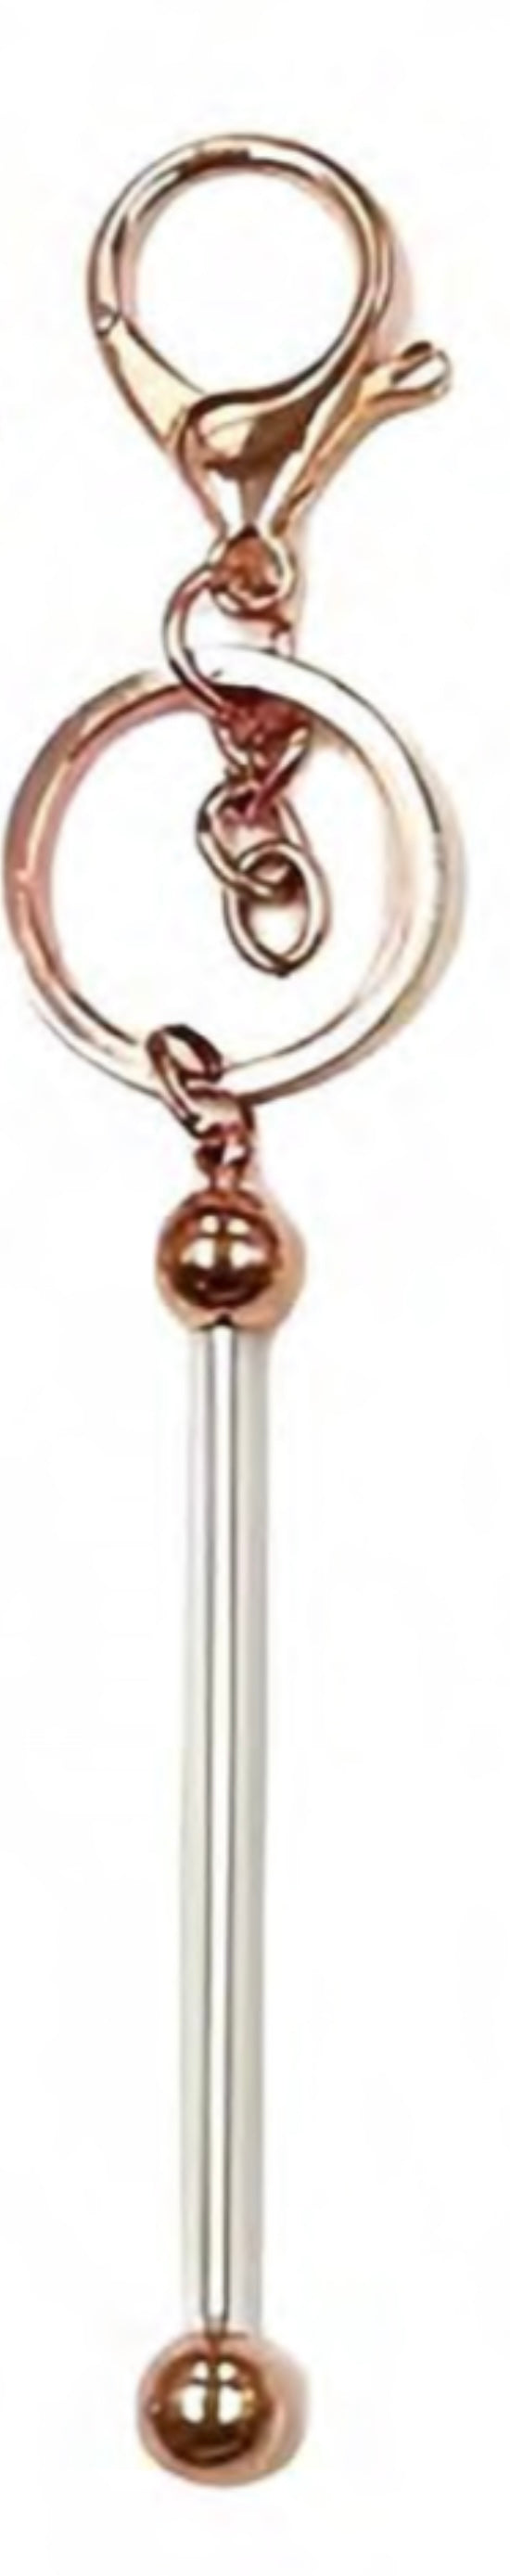 Beadable Keychain Rose Gold Focal Bead  (Pre-Buy)